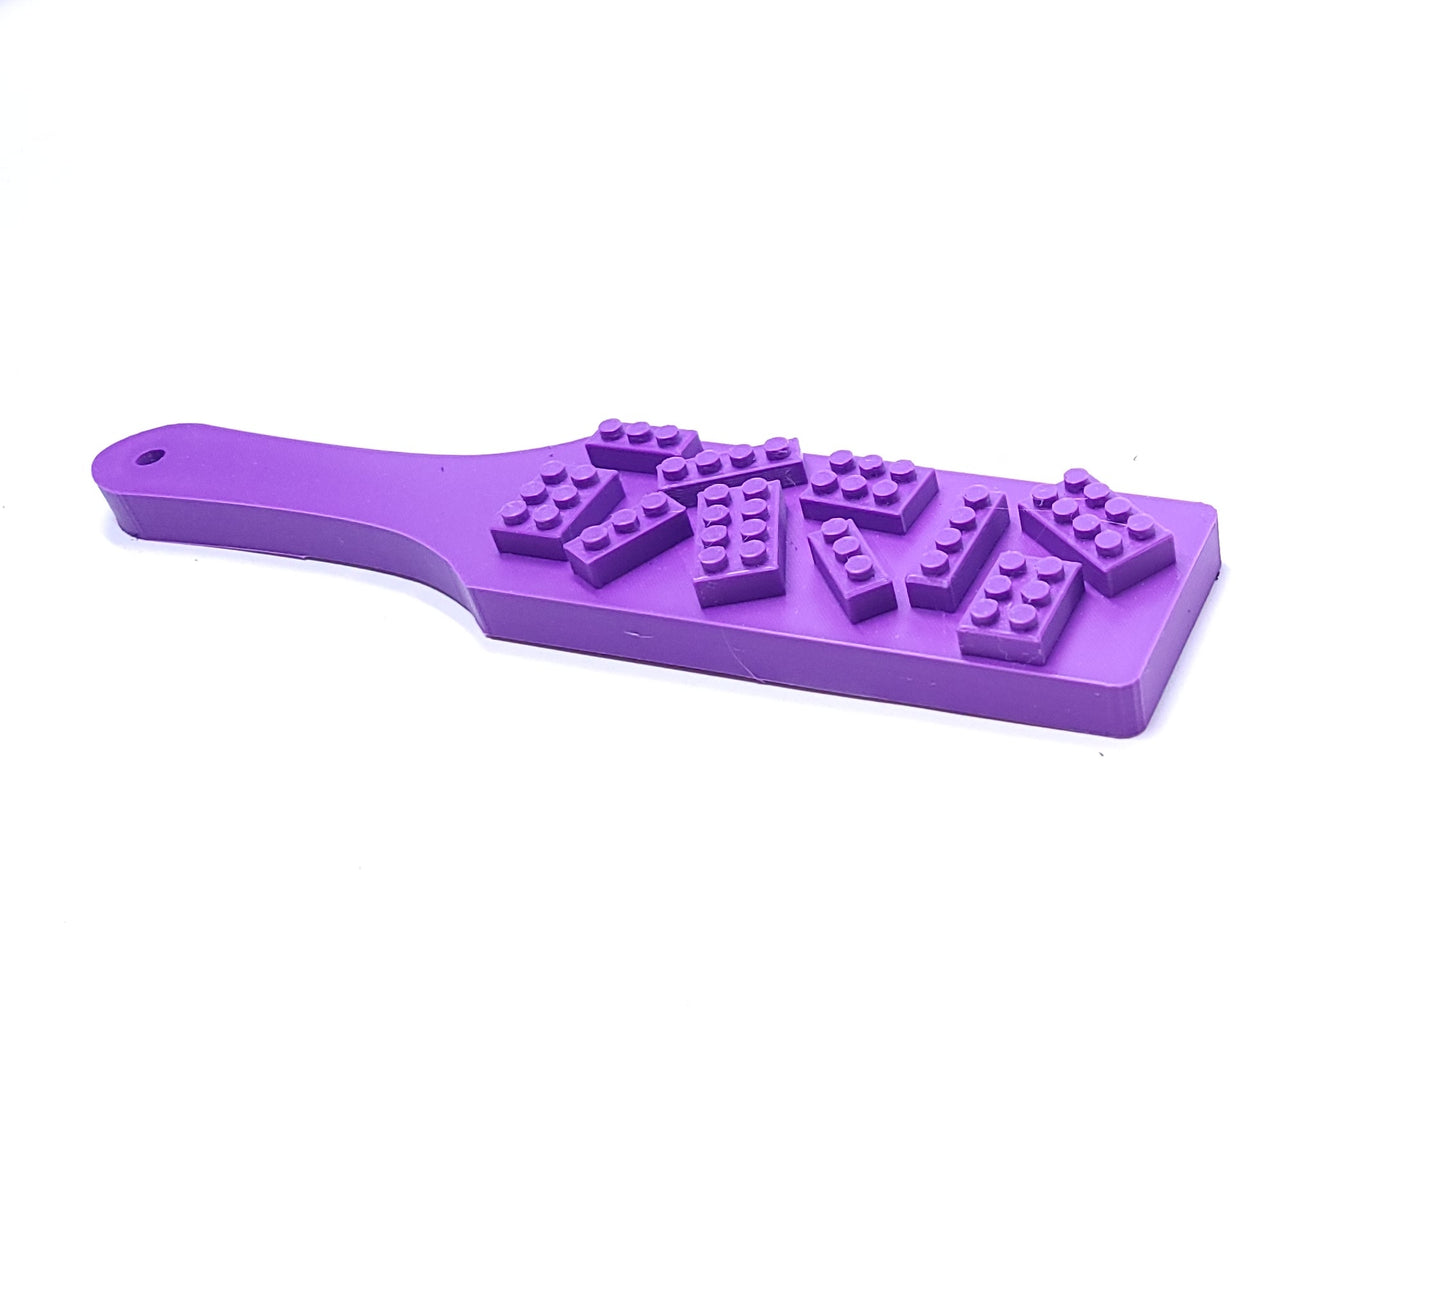 Purple 'Lego' Paddle- In Stock